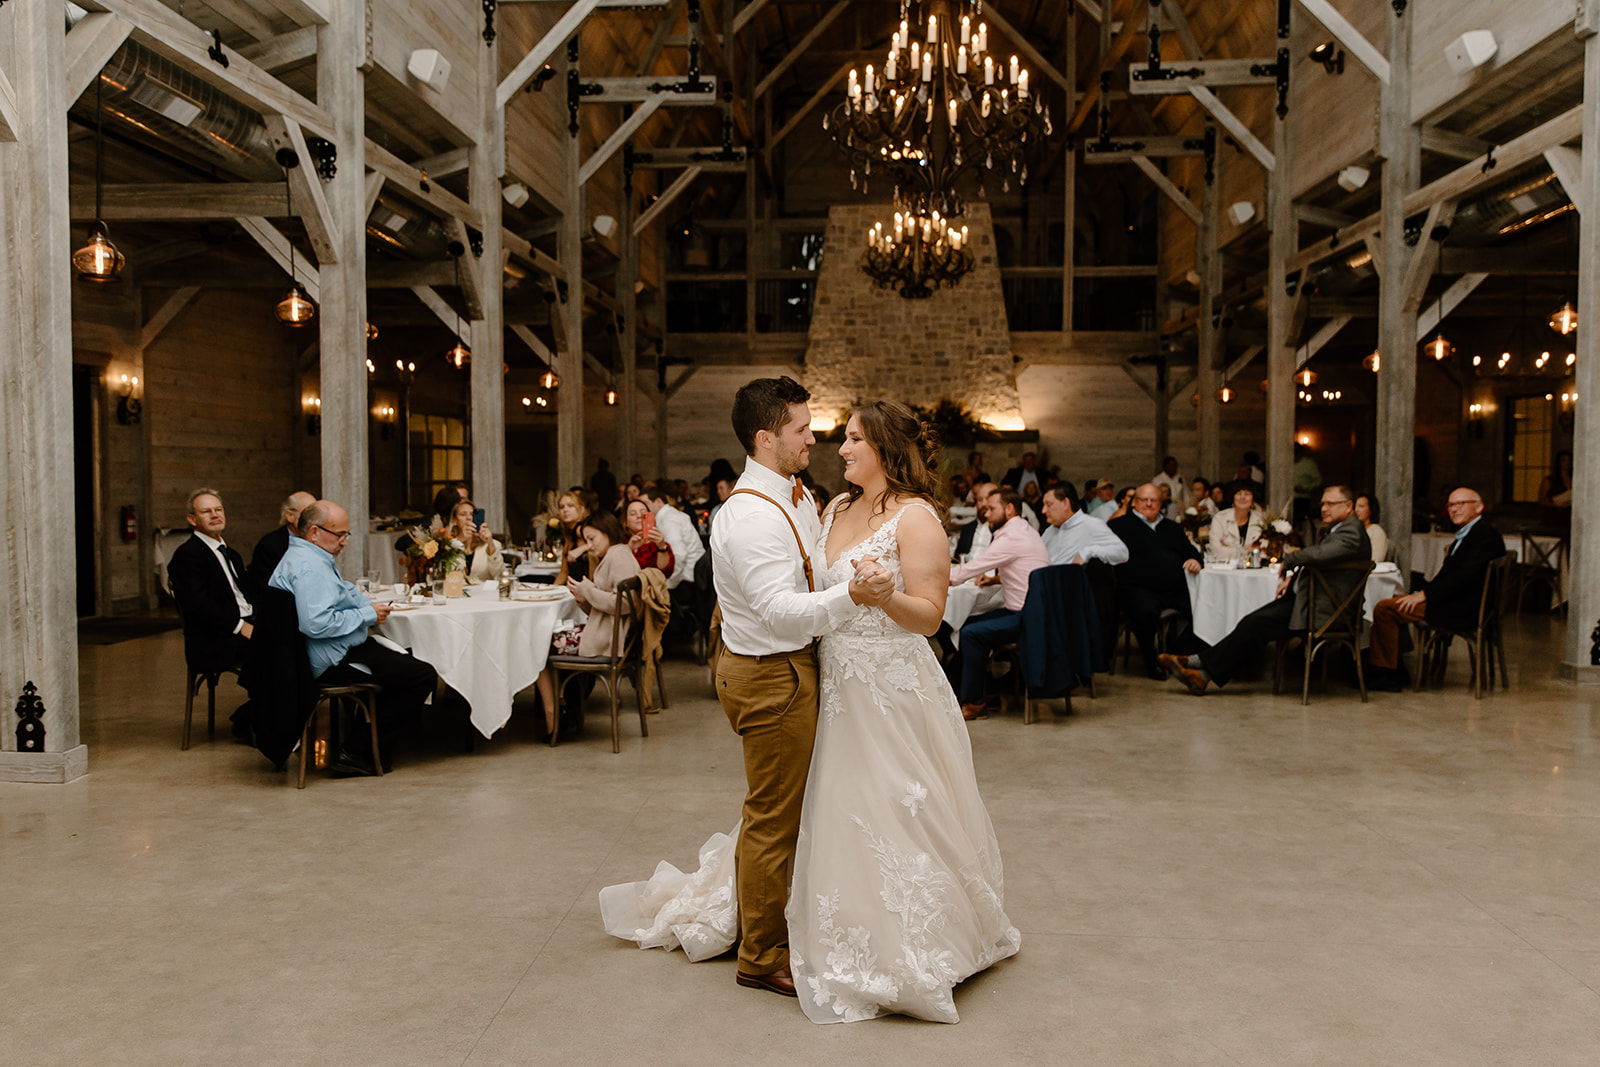 Bride and groom dance in front of their guests